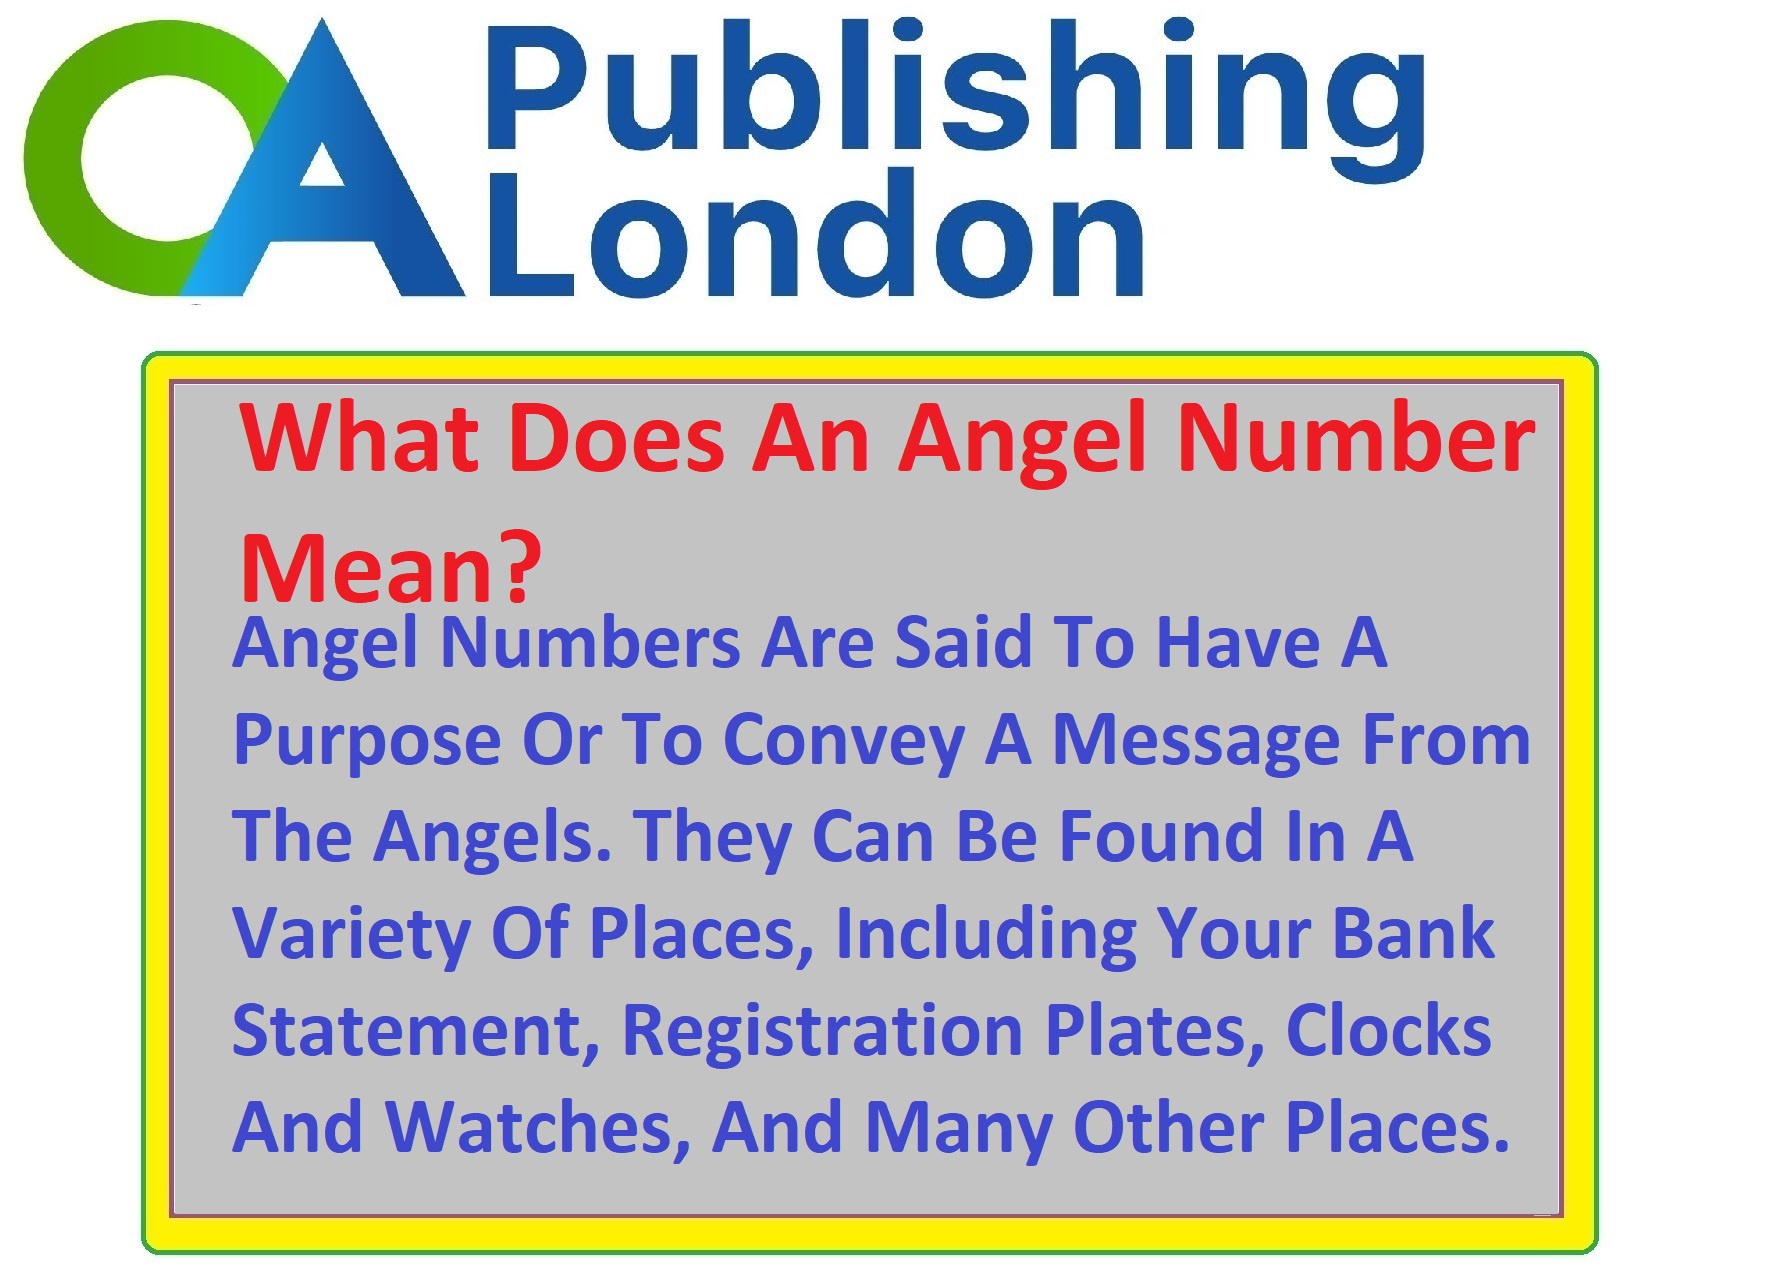 Angel Number MeanIng And Where It Can Be Found